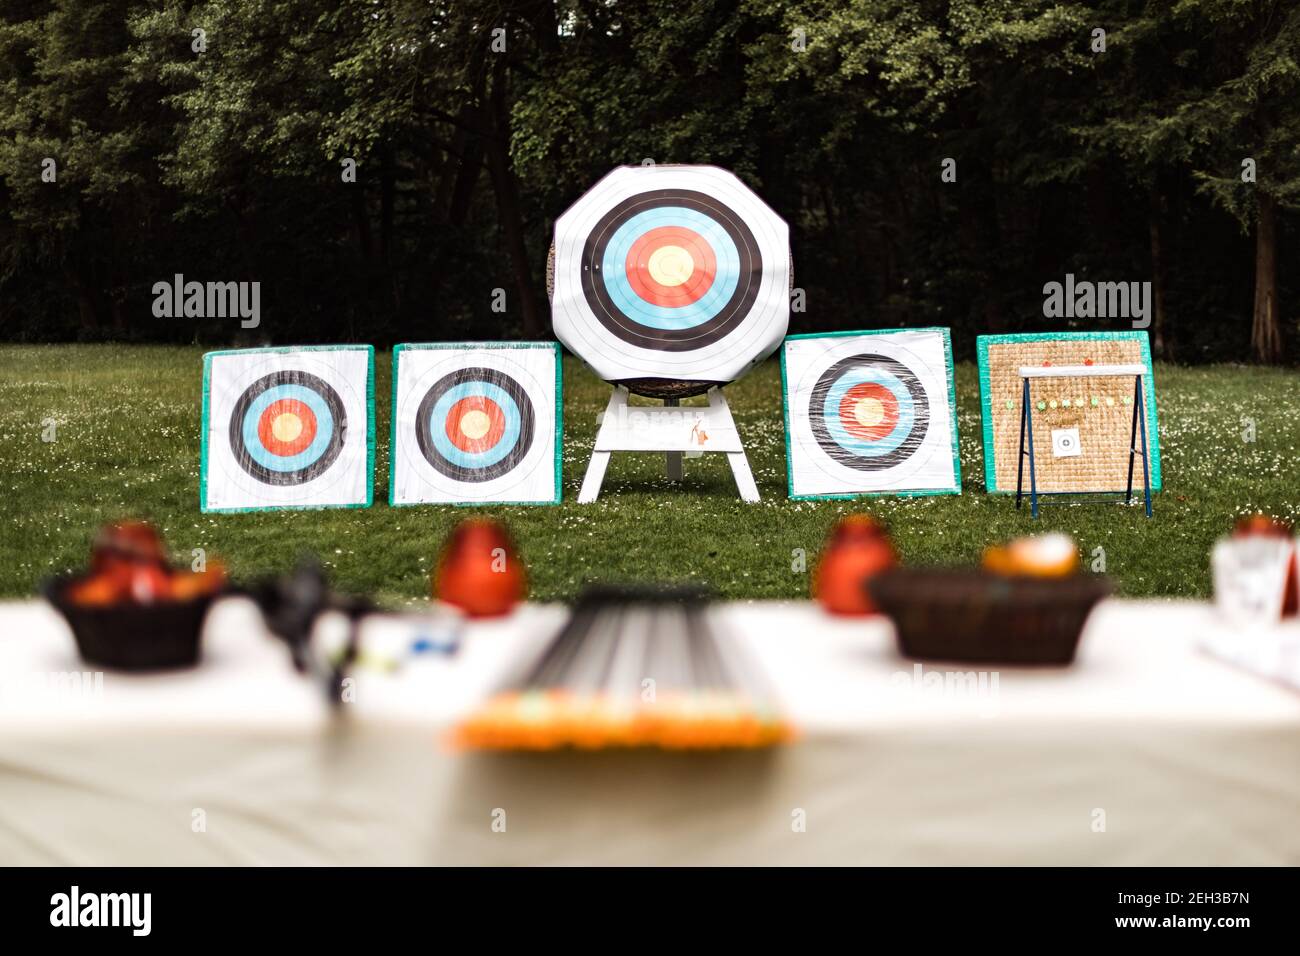 photo of a target board game in the garden Stock Photo